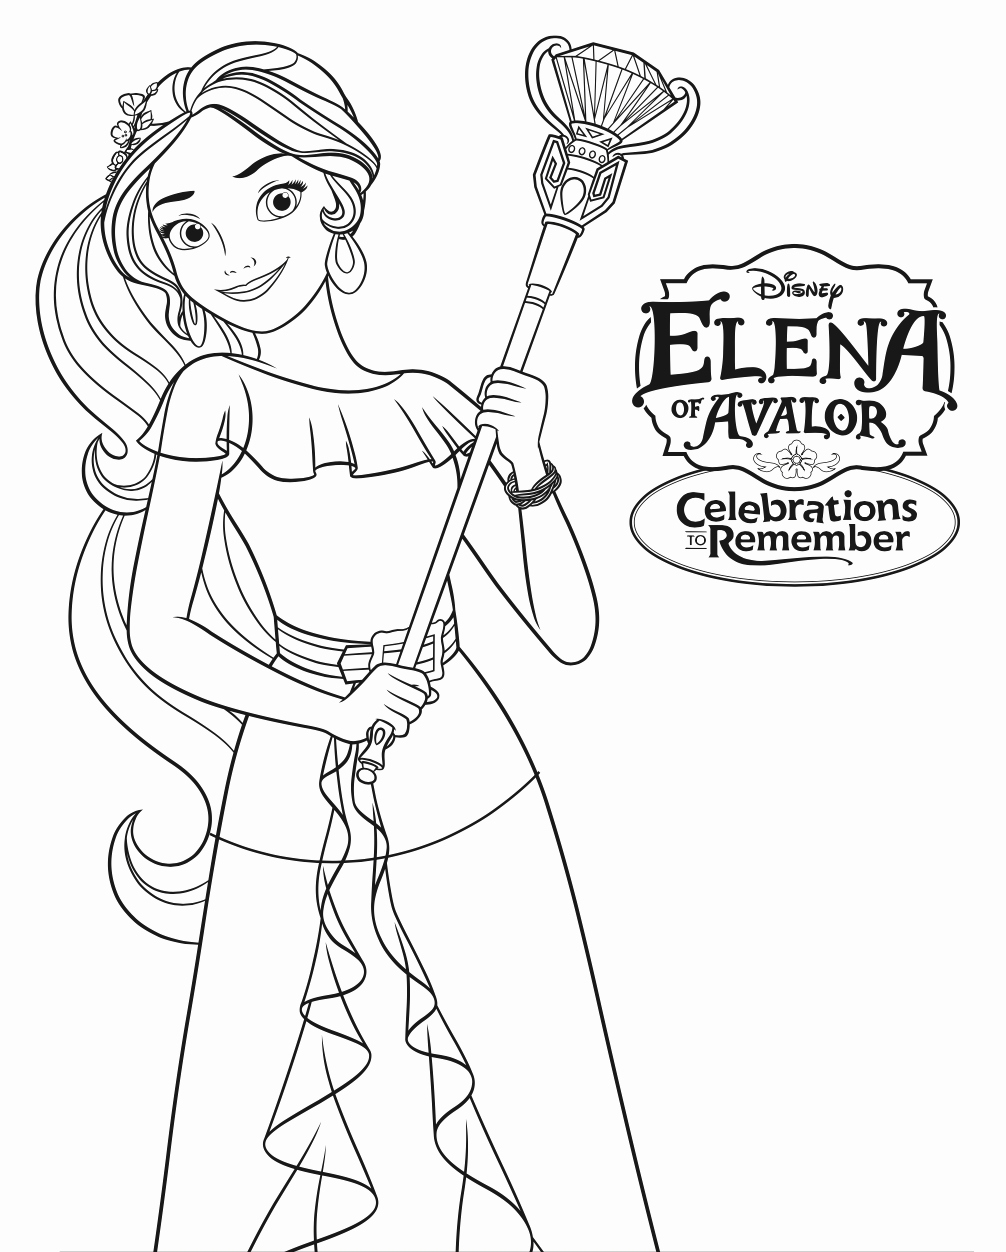 Elena Of Avalor Coloring Pages At Getdrawings Free For Personal ...